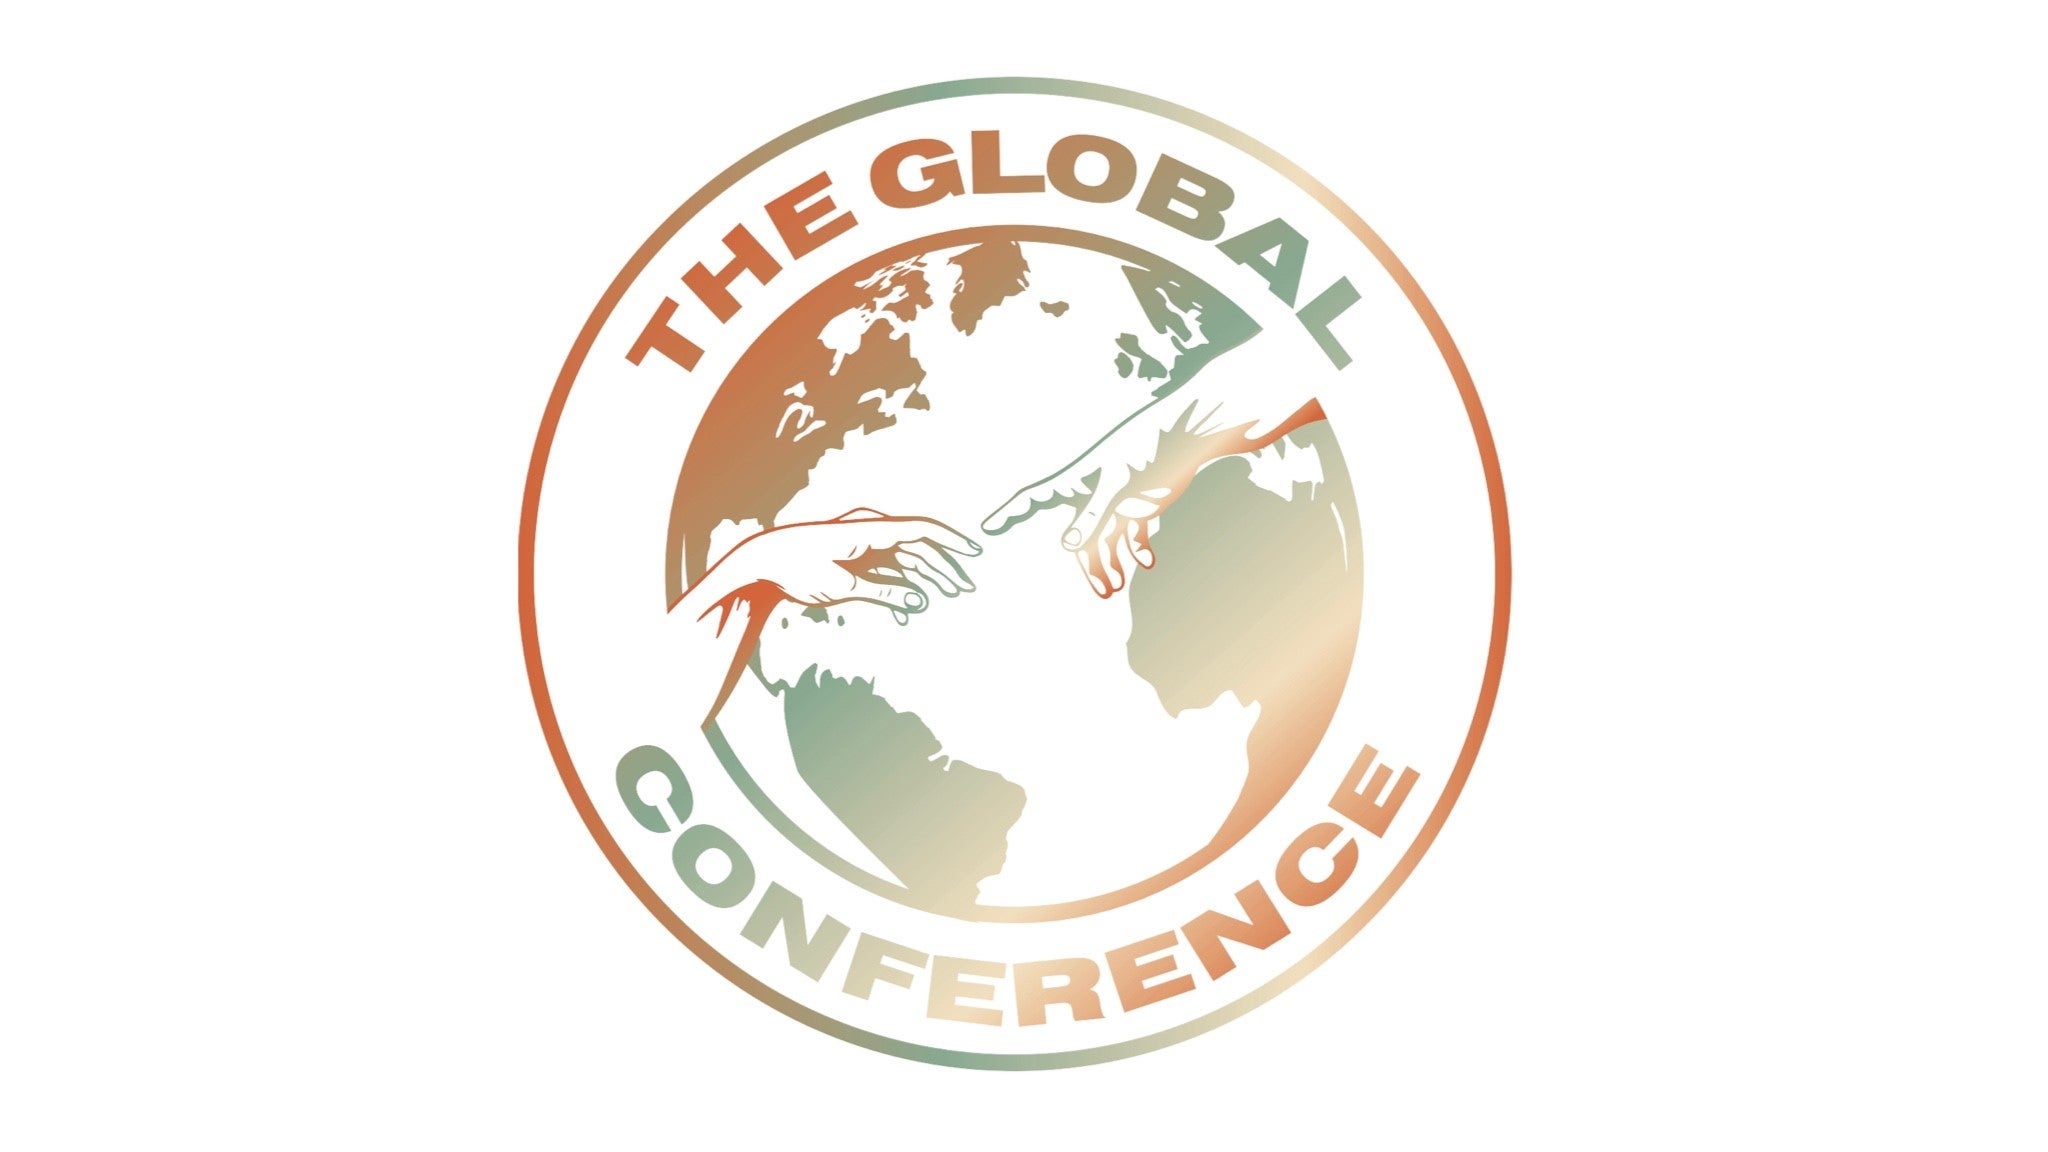 The Global Conference July 28 & 29 in Pembroke Pines promo photo for Exclusive presale offer code